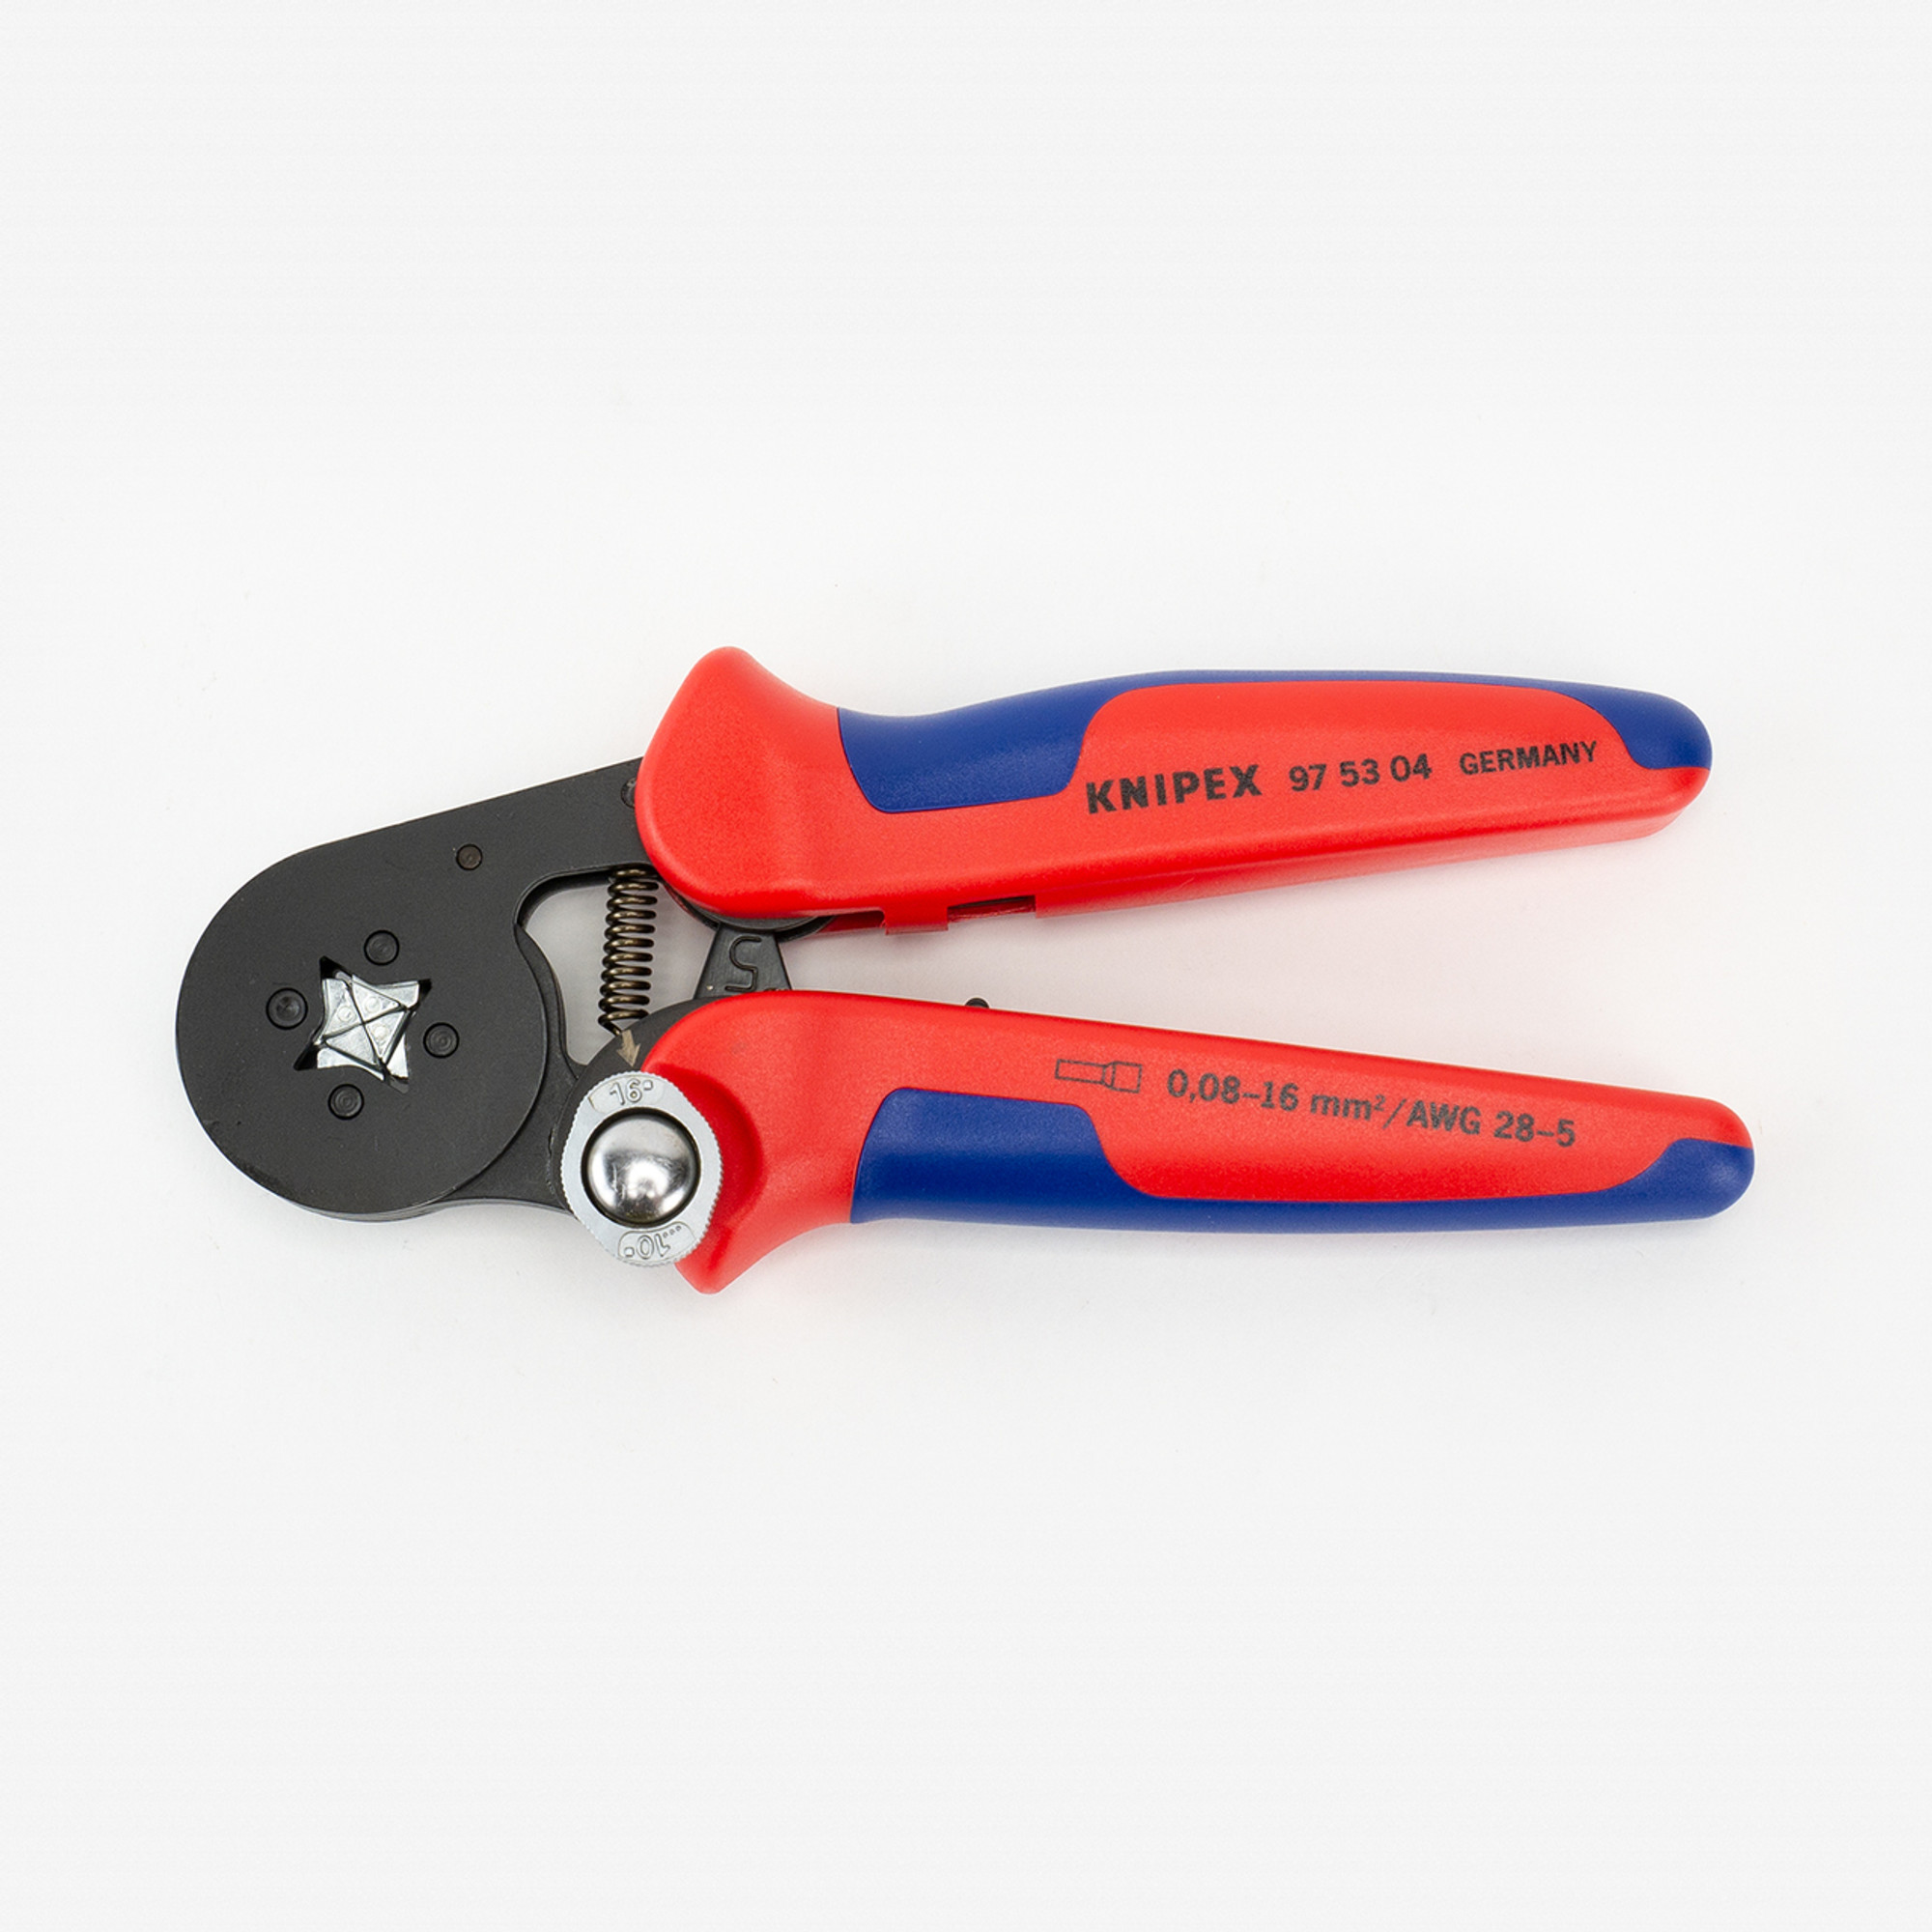 Knipex 97-53-04 Self-Adjusting Square Crimping Pliers - End Sleeves (ferrules) - KC Tool